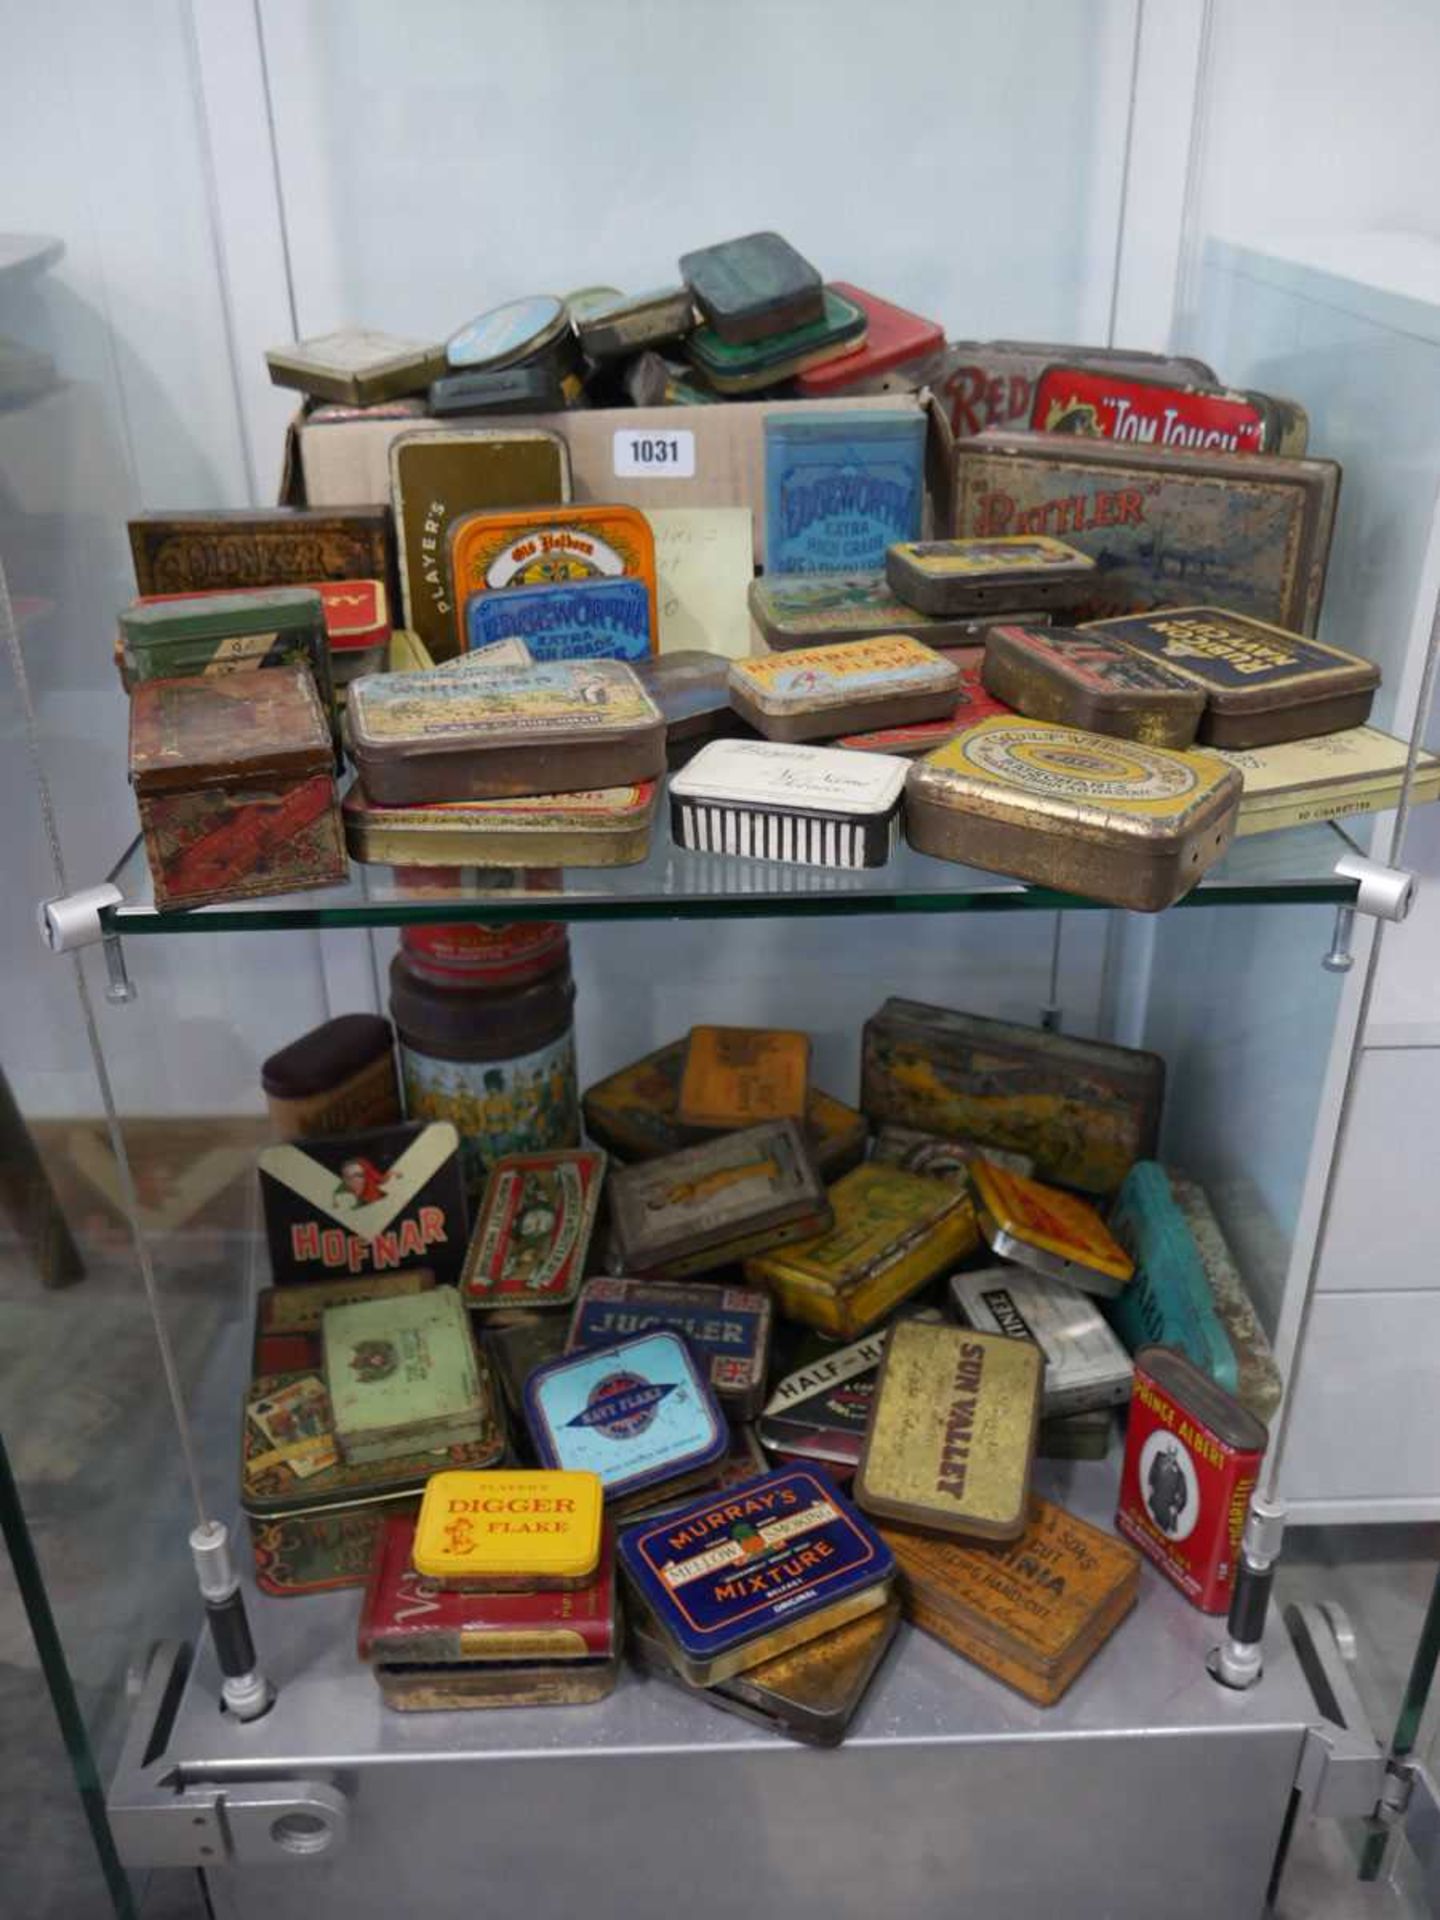 2 shelves of collectible tins, mostly tobacco